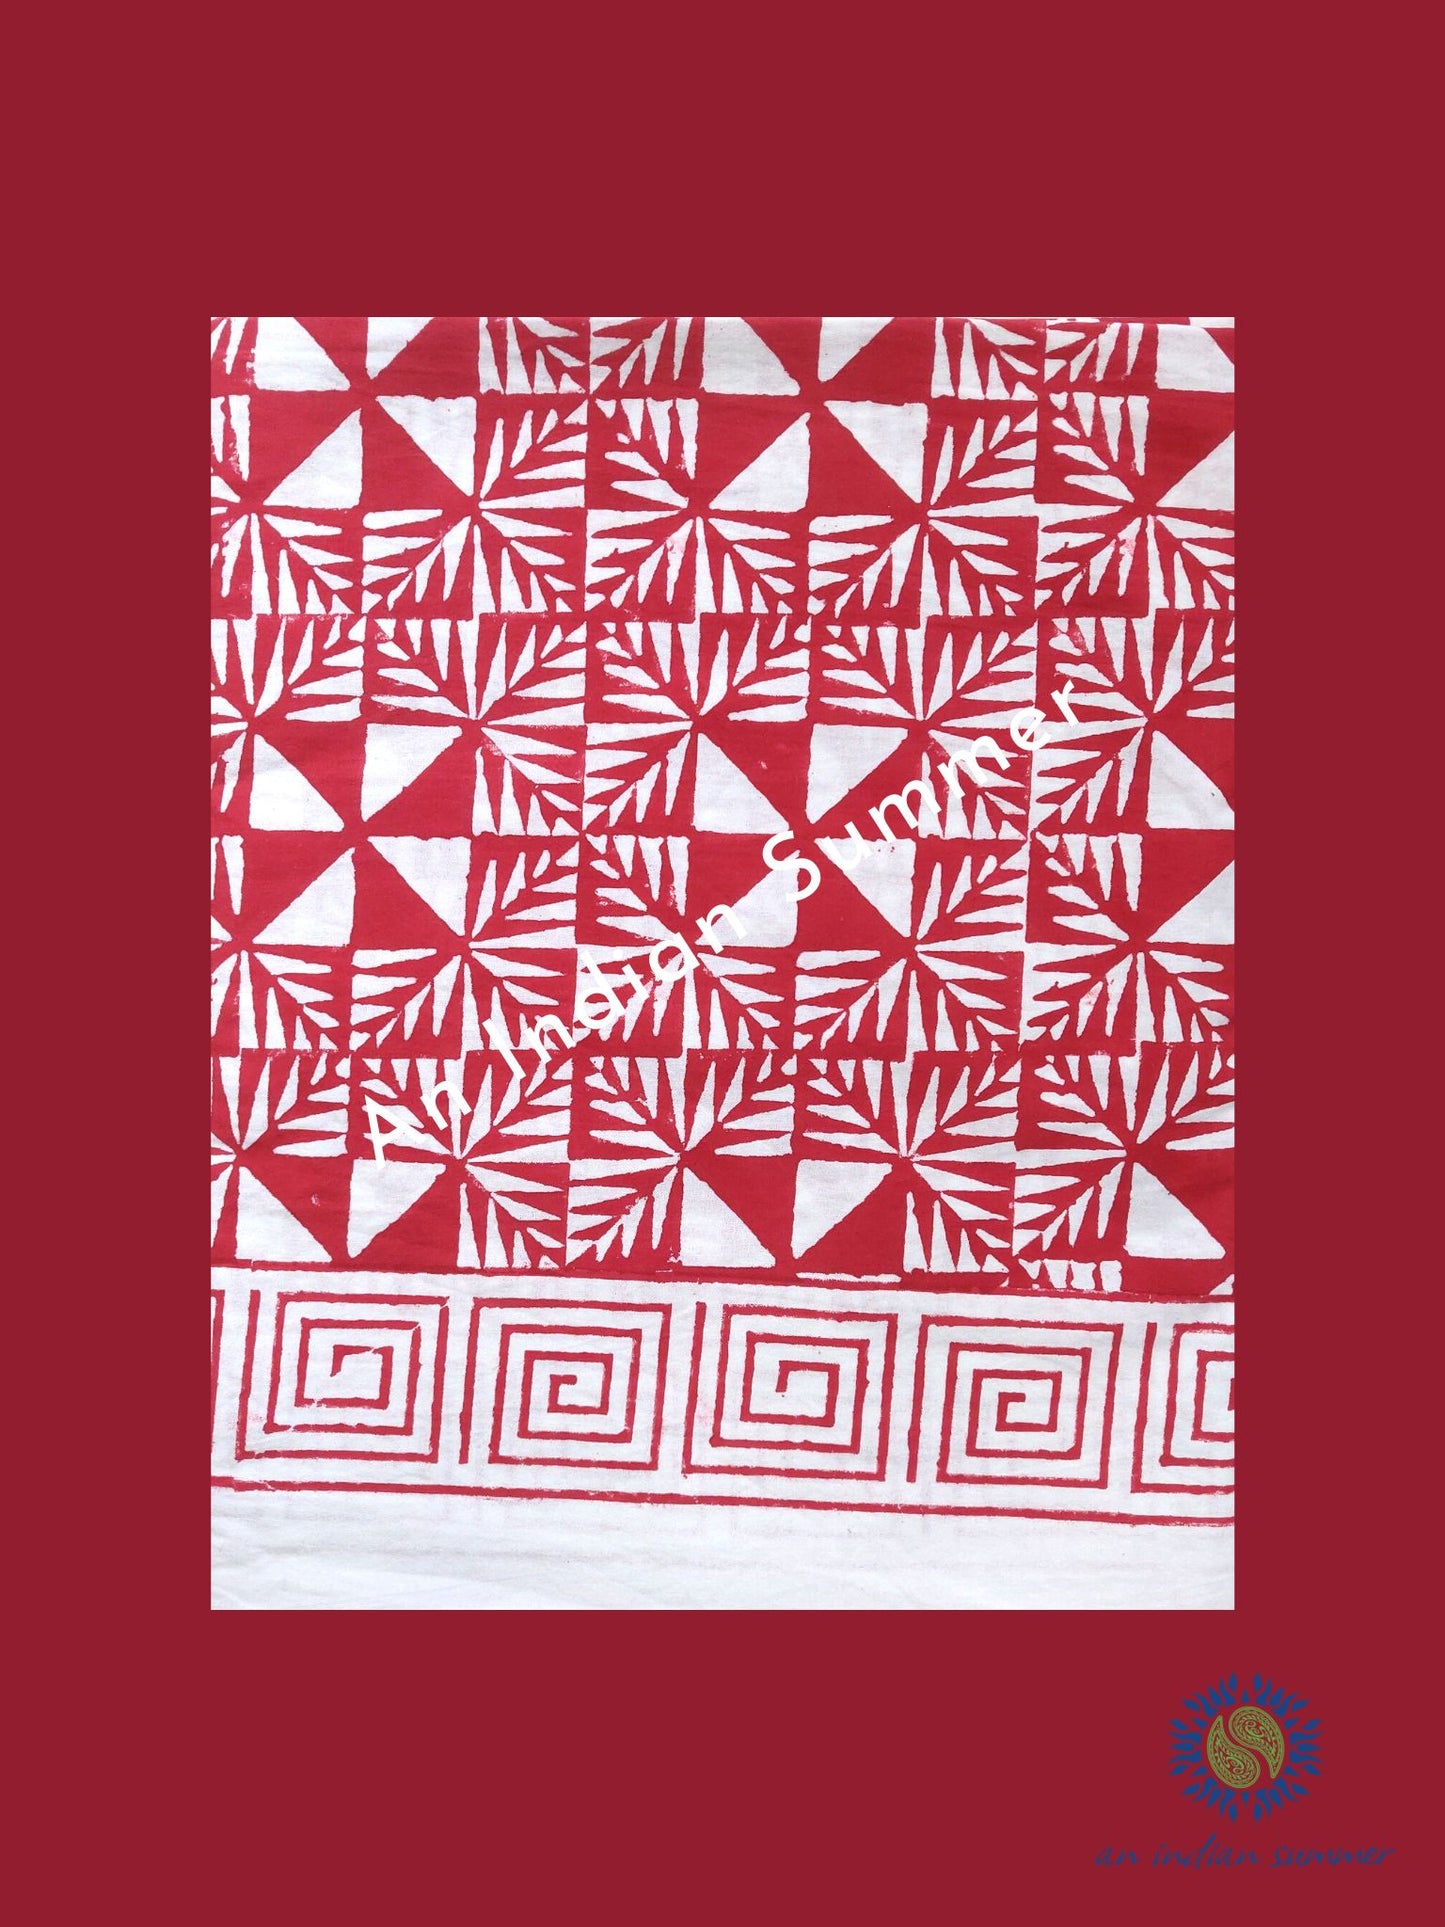 Tablecloth | Geometric | Red | Wood Block Print | Hand Block Printed | Cotton | An Indian Summer | Seasonless Timeless Sustainable Ethical Authentic Artisan Conscious Clothing Lifestyle Brand